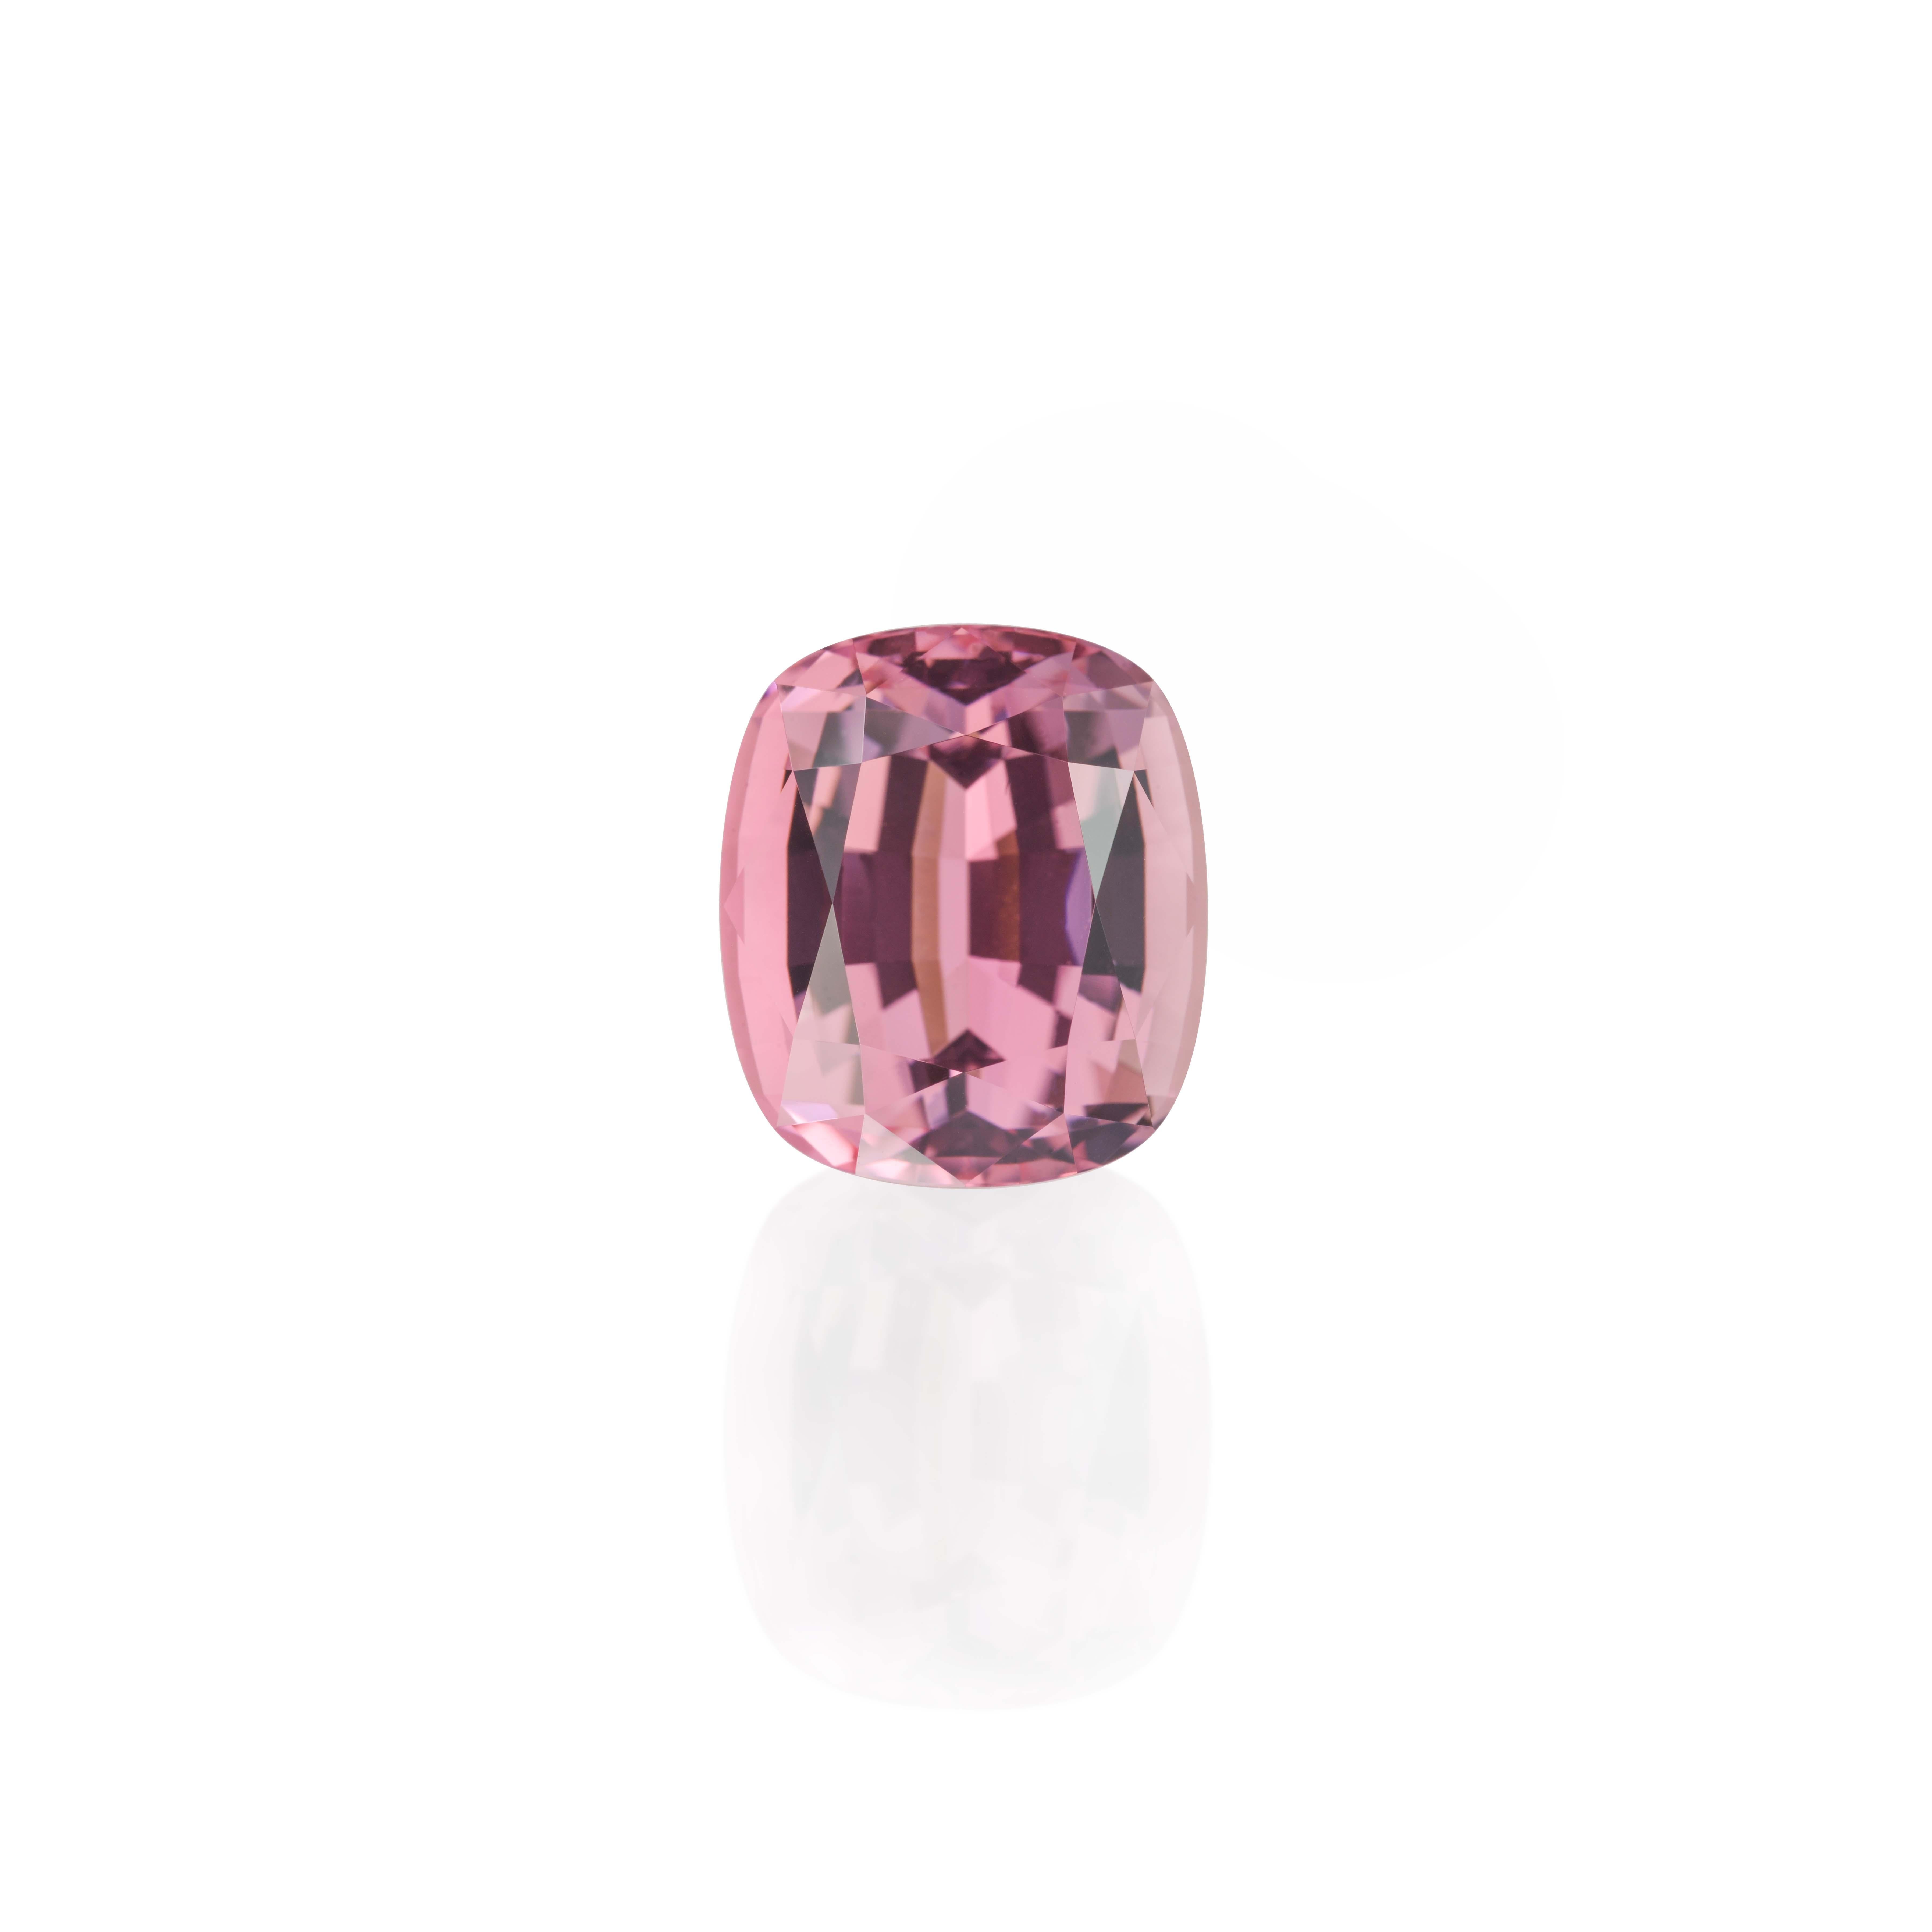 Marvelous 9.36 carat Pink Tourmaline rectangular cushion gem, offered loose to a very special lady.
Returns are accepted and paid by us within 7 days of delivery.
We offer supreme custom jewelry work upon request. Please contact us for more